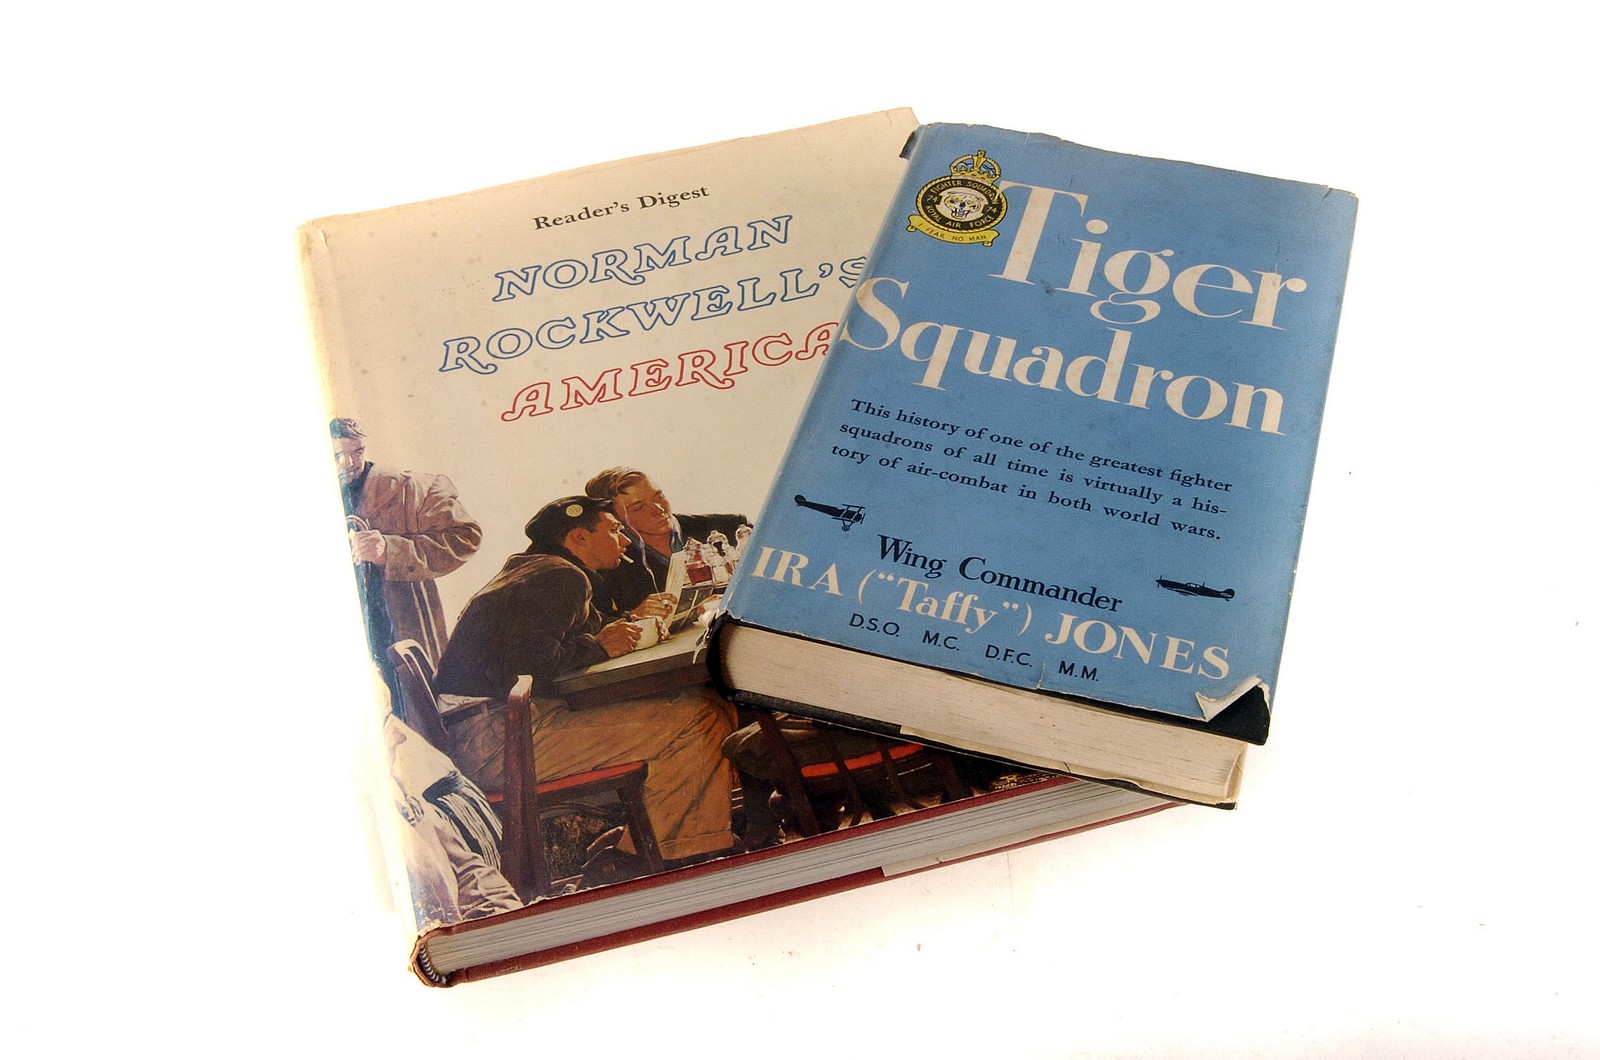 Books: Tiger Squadron' 1st Edition by Ira 'Taffy' Jones, together with Norman Rockwell's America